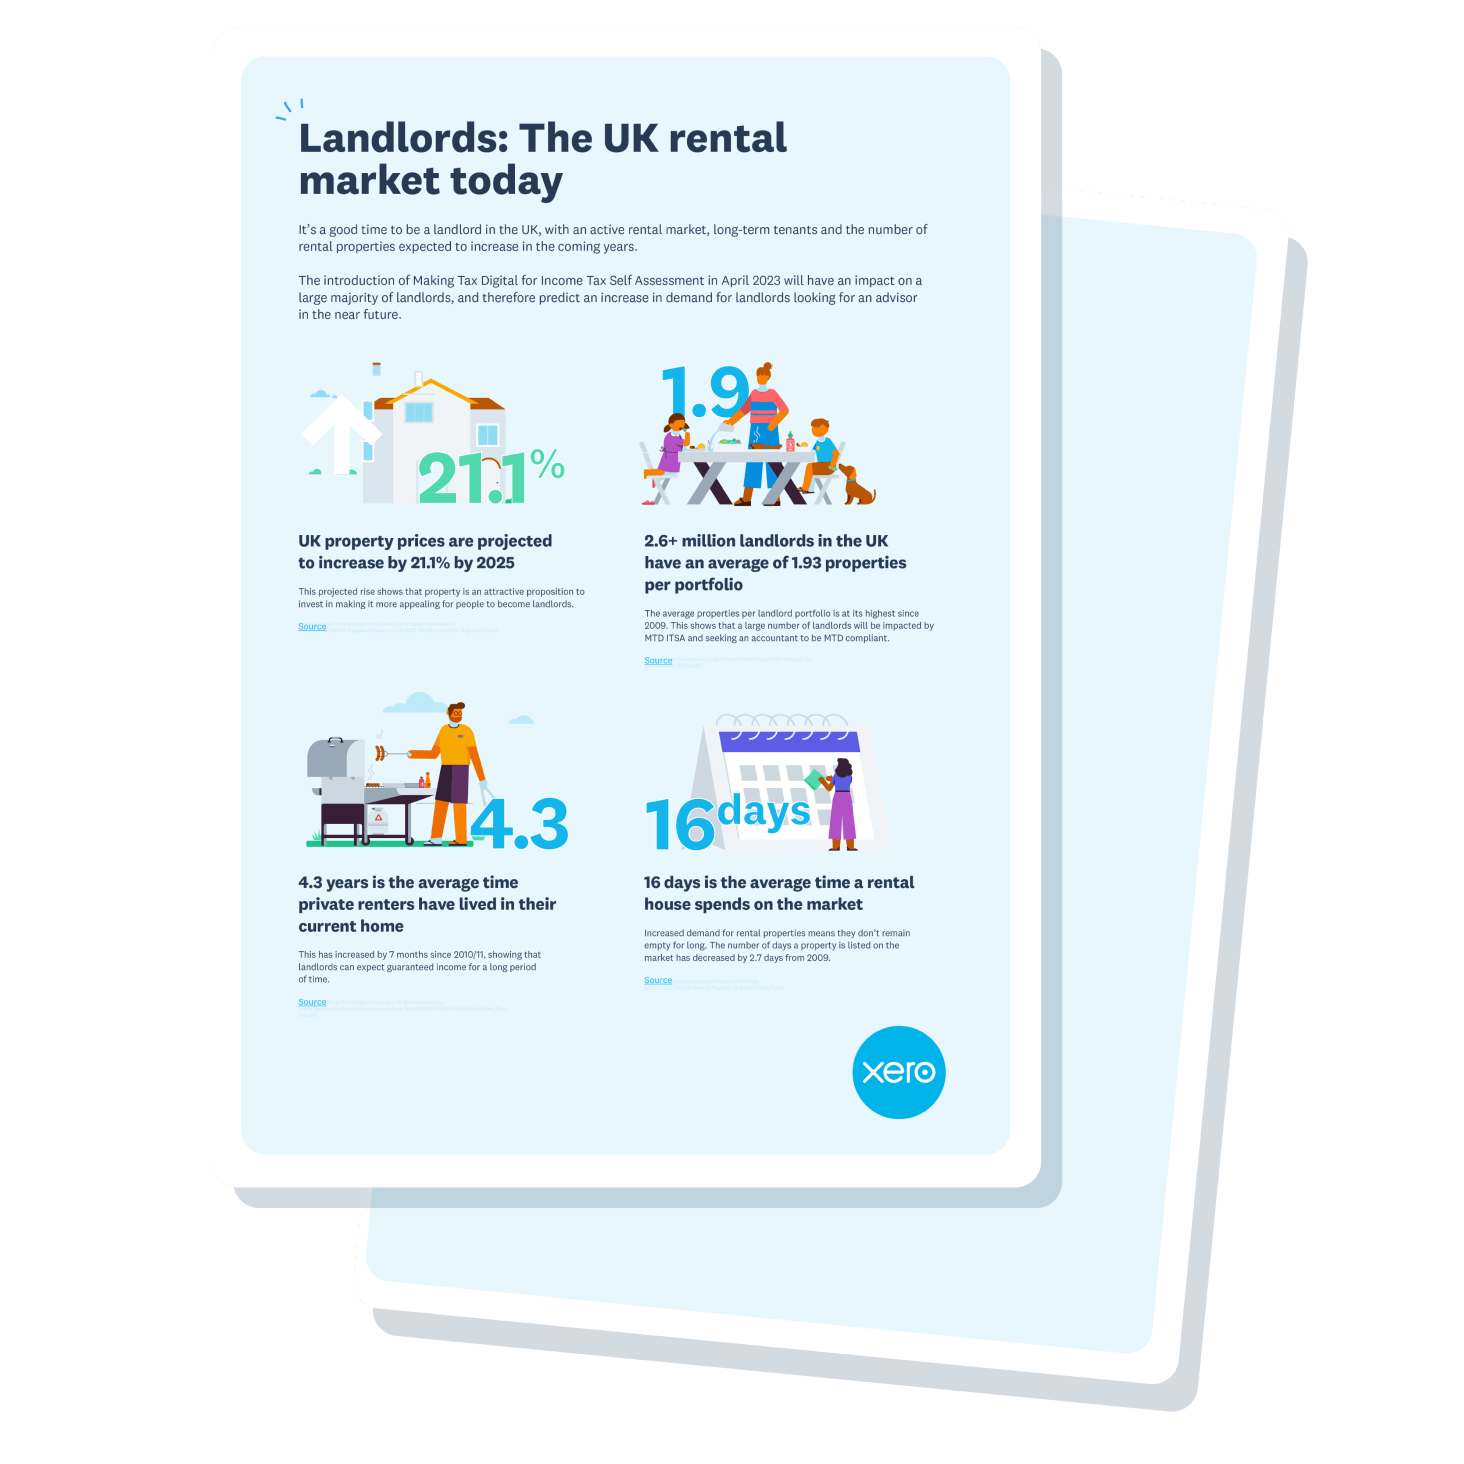 An infographic from Xero shows statistics about the UK rental market.